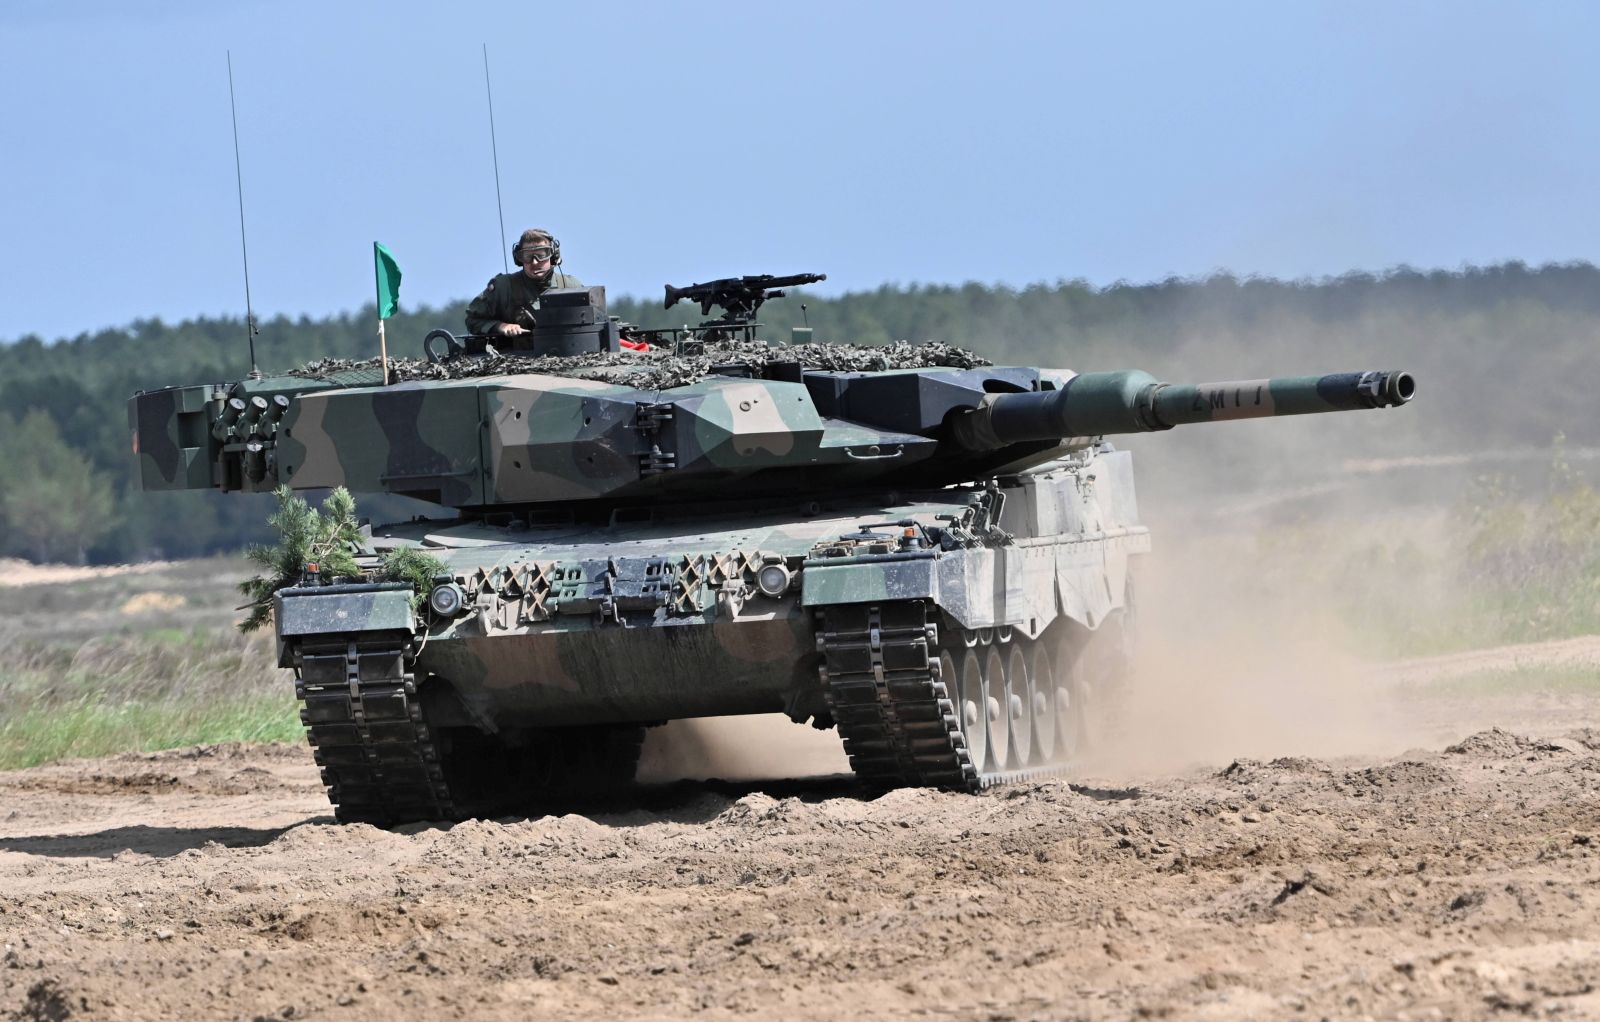 epa10424673 (FILE) - A 'Leopard 2PL' tank of the Polish army during the international exercise pk. DefenderEurope2022 at firing range Drawsko Pomorskie, northwest Poland, 27 May 2022 (reissued 23 January 2023). During a tour through the country, Polish Prime Minister Mateusz Morawiecki announced in Poznan on 23 January 2023, that Poland will 'formally ask Germany for permission to hand over some of its German-made Leopard 2 tanks to Ukraine', the Polish news agency PAP reported.  EPA/Marcin Bielecki POLAND OUT